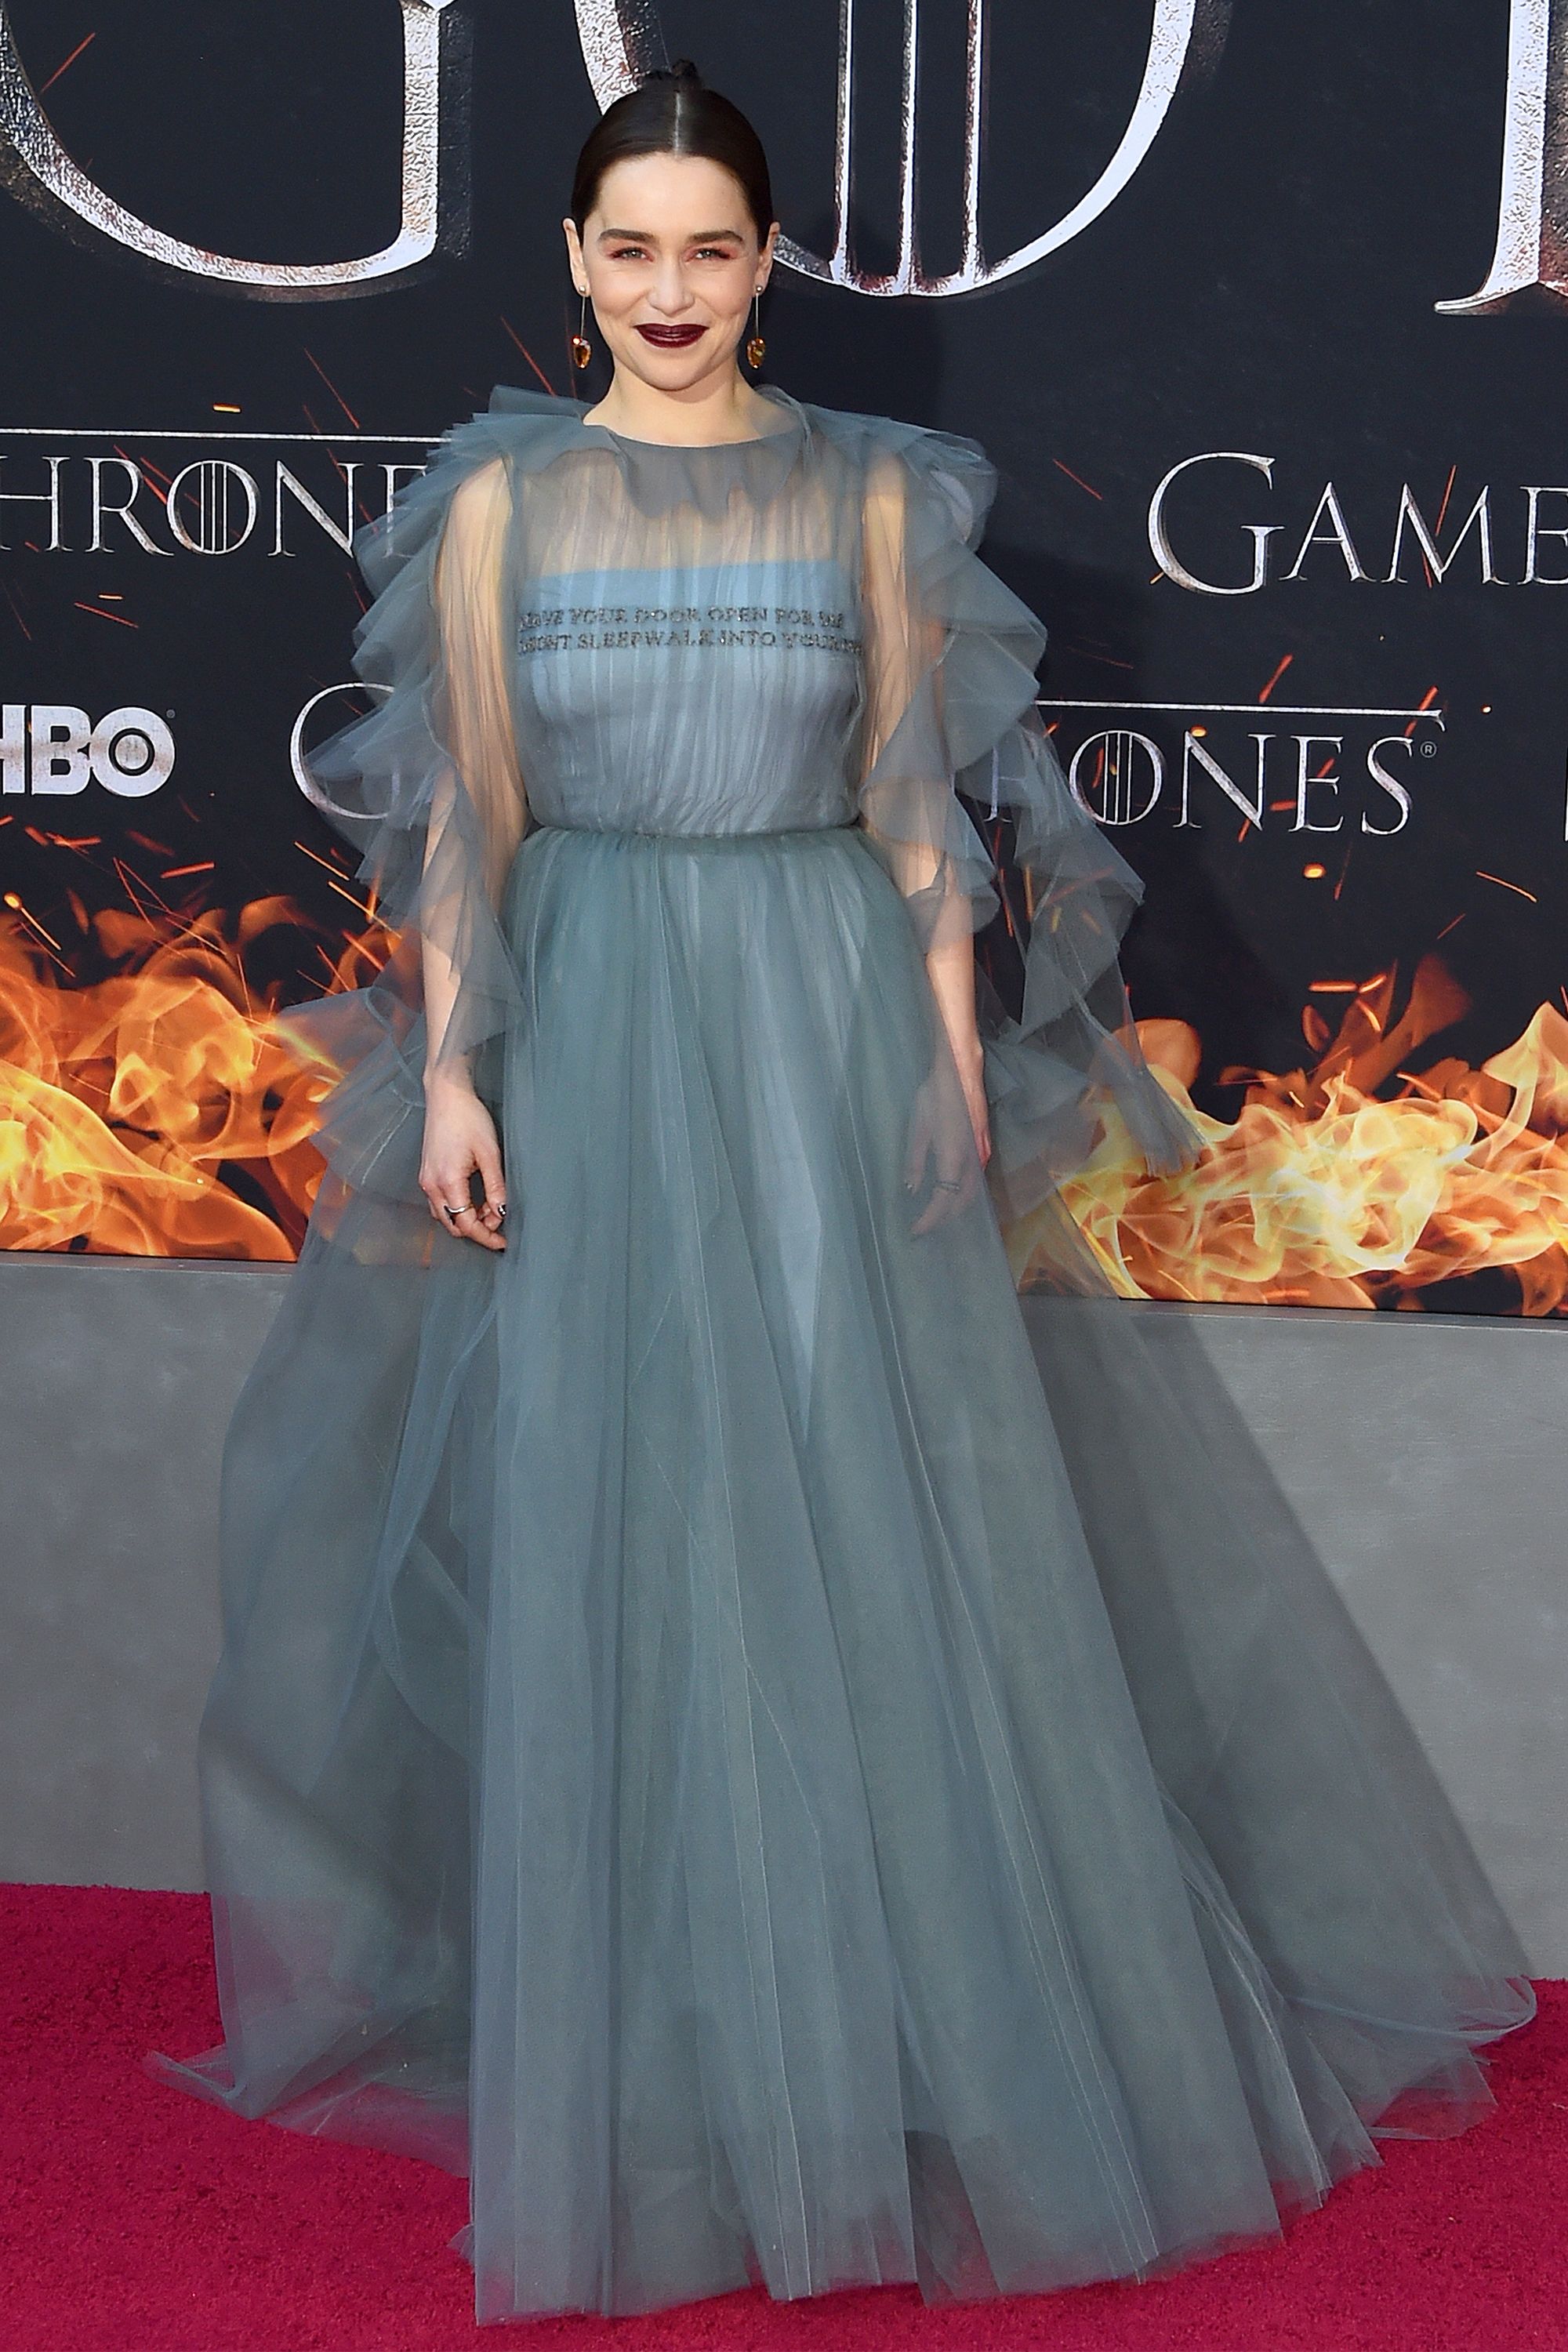 Emilia Is Dressed Like A True Queen On The Game of Thrones Red Carpet